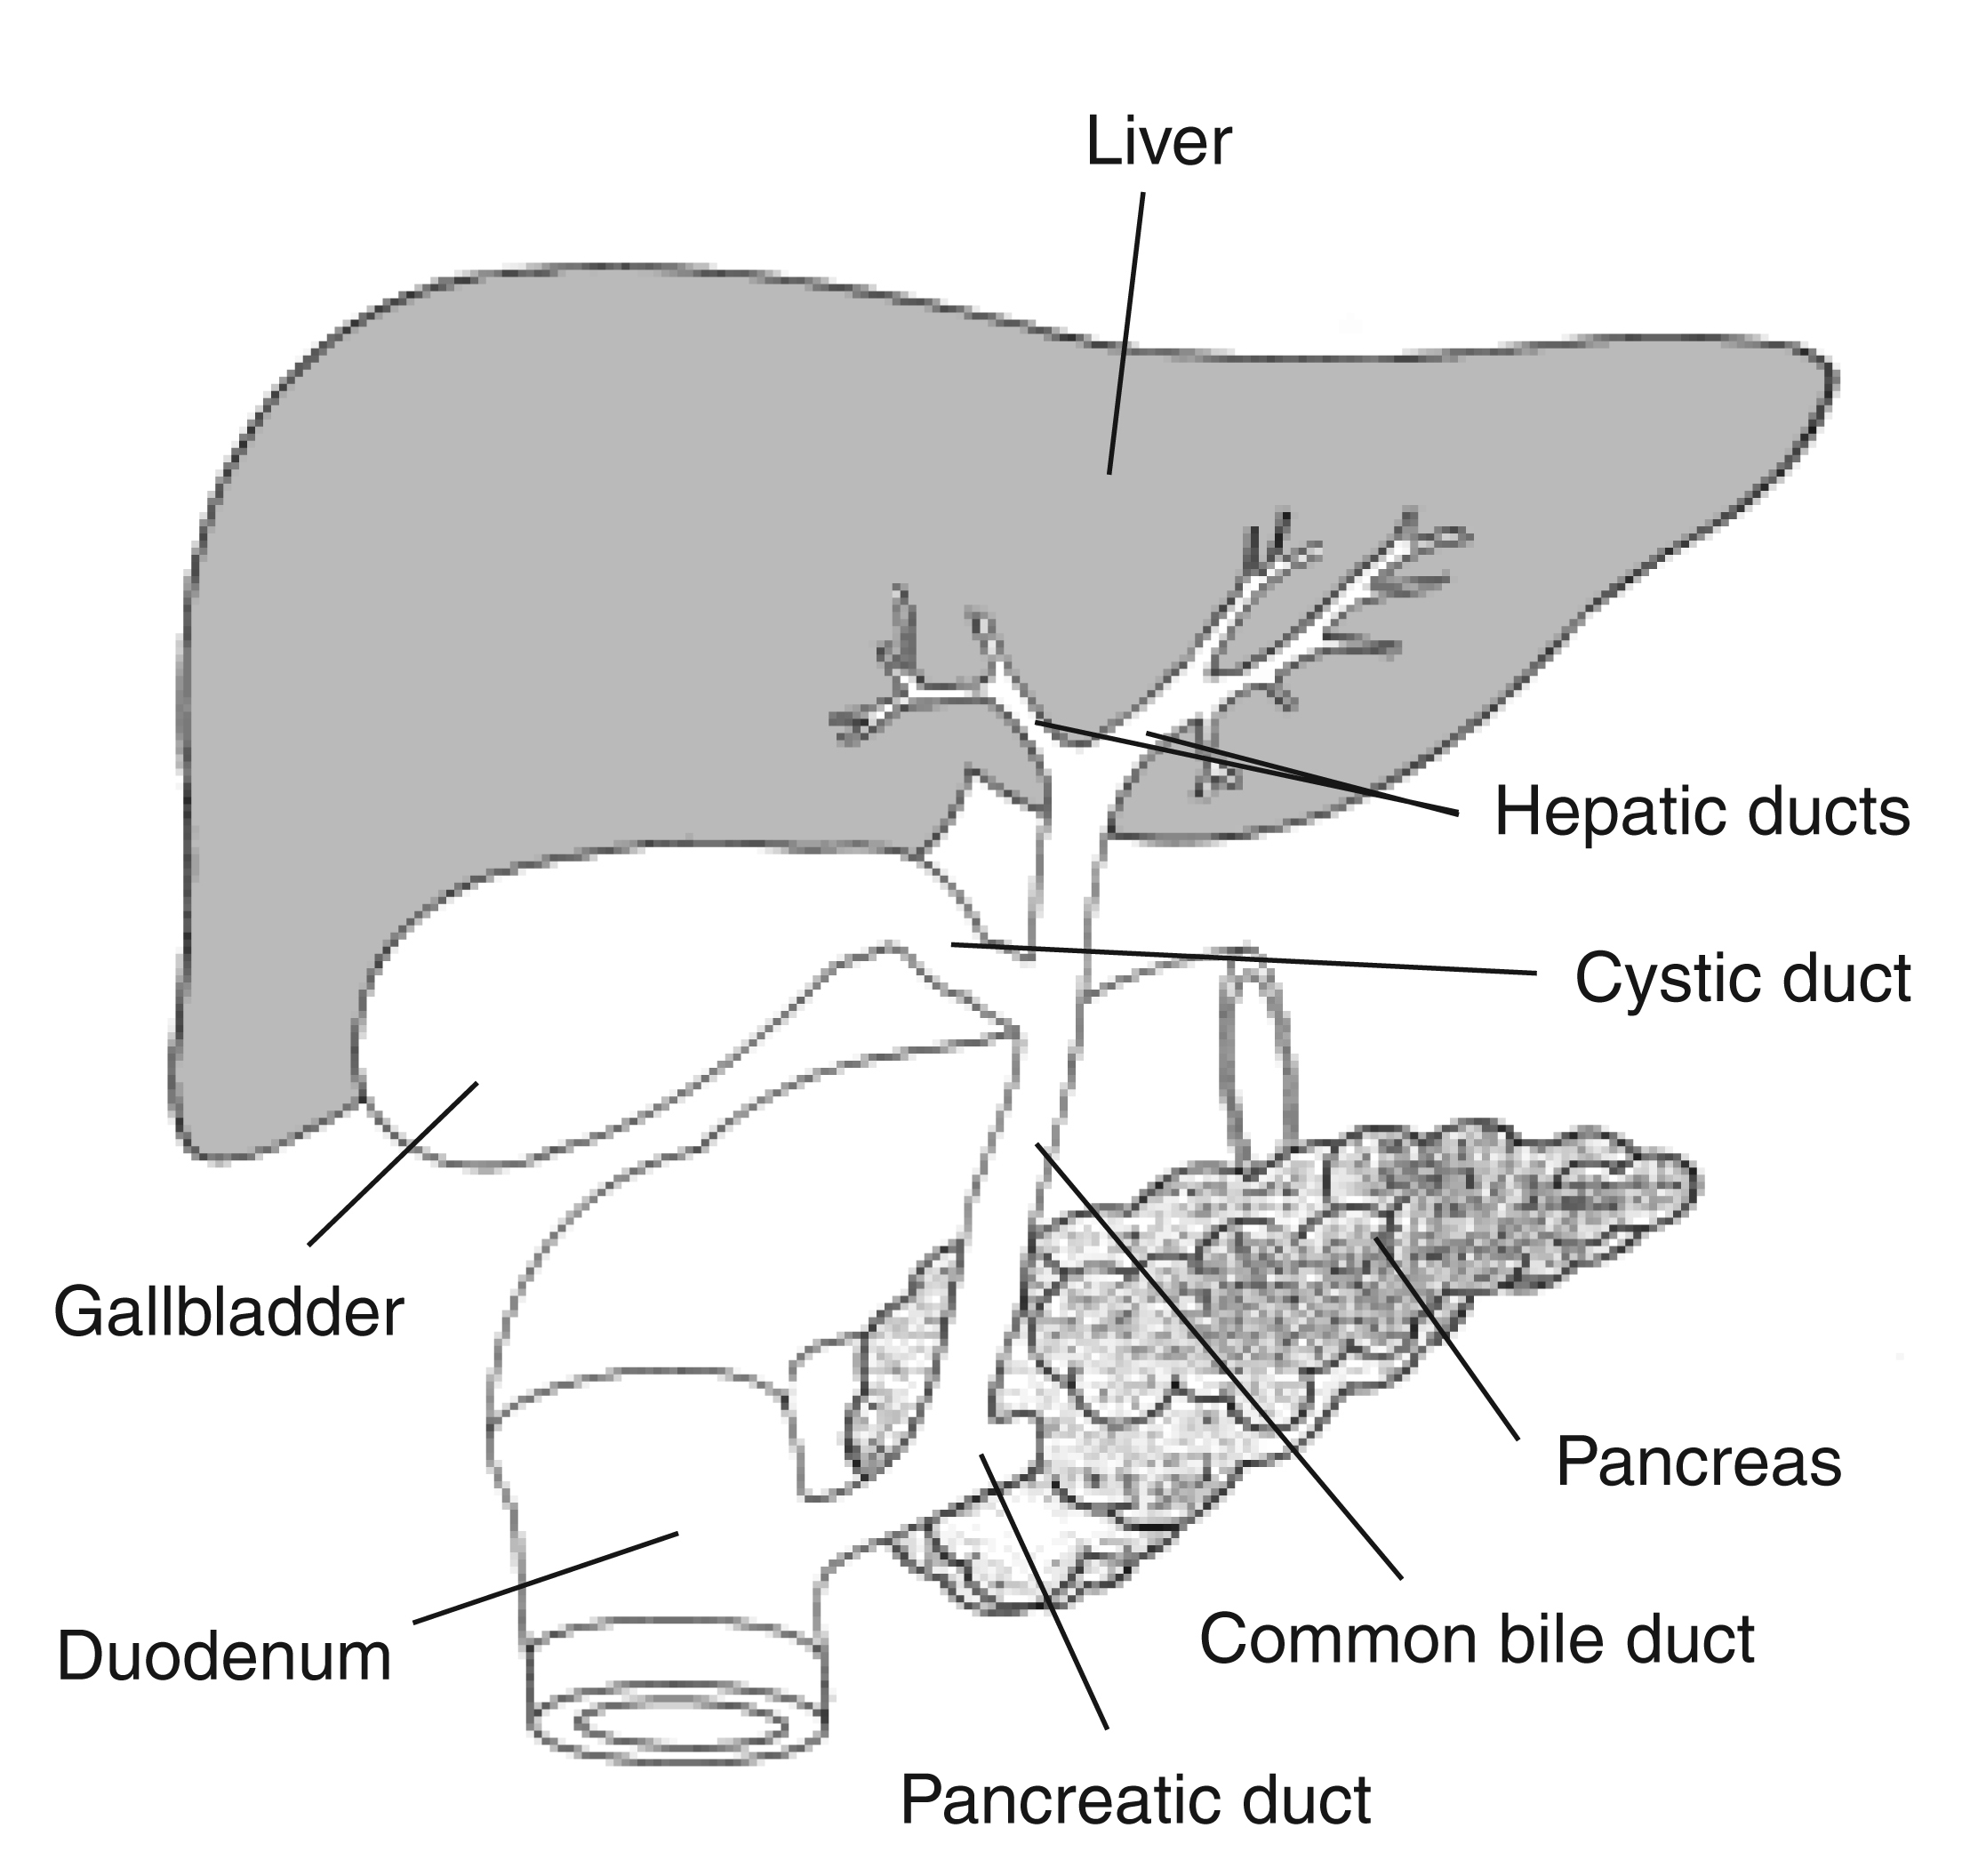 cystic duct